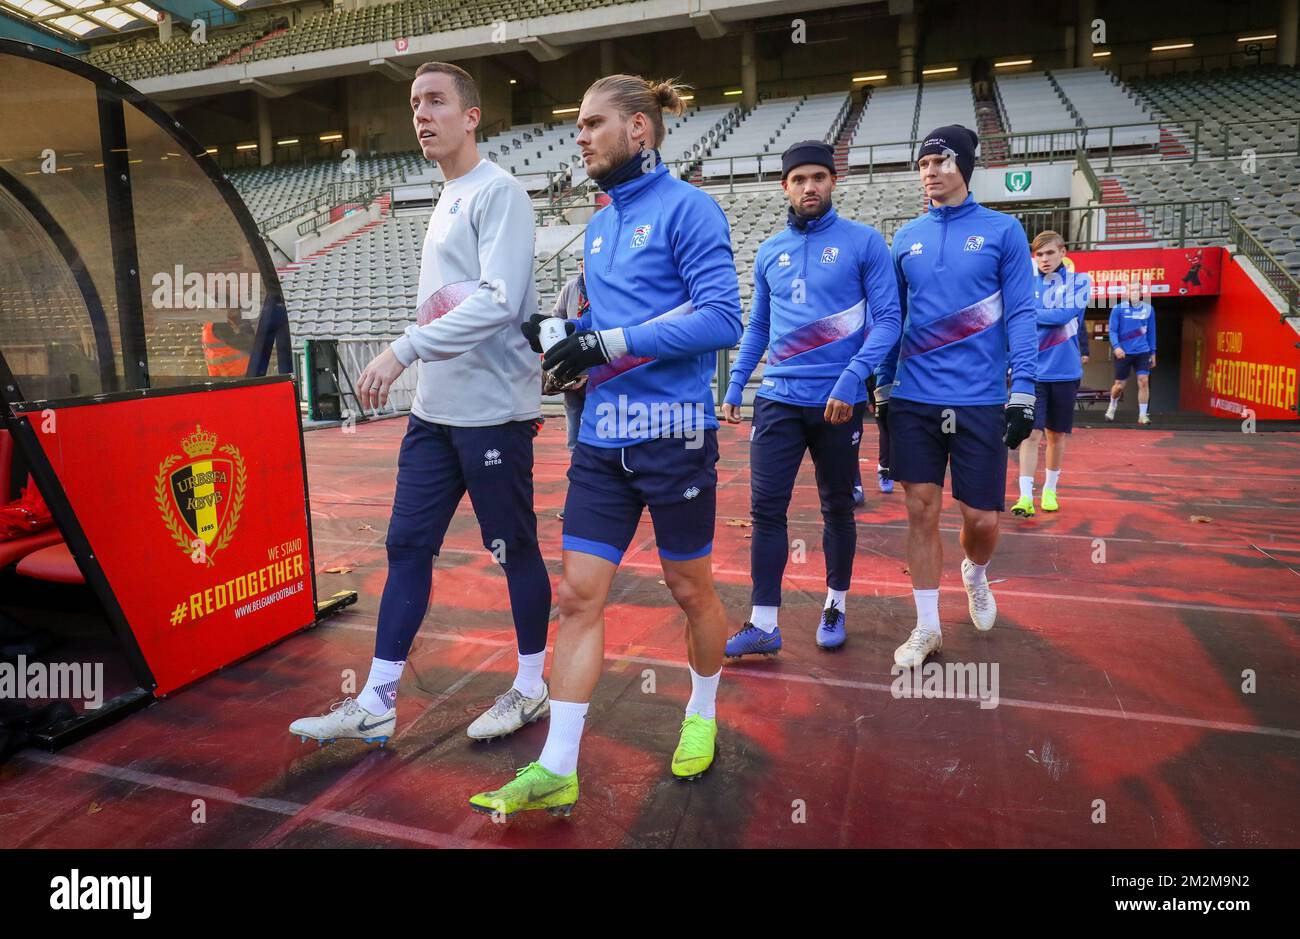 Iceland's Rurik Gislason arrives for a training session of Iceland national soccer team, in Brussels, Wednesday 14 November 2018. Iceland will play tomorrow Belgium in the Nation League competition. BELGA PHOTO VIRGINIE LEFOUR Stock Photo